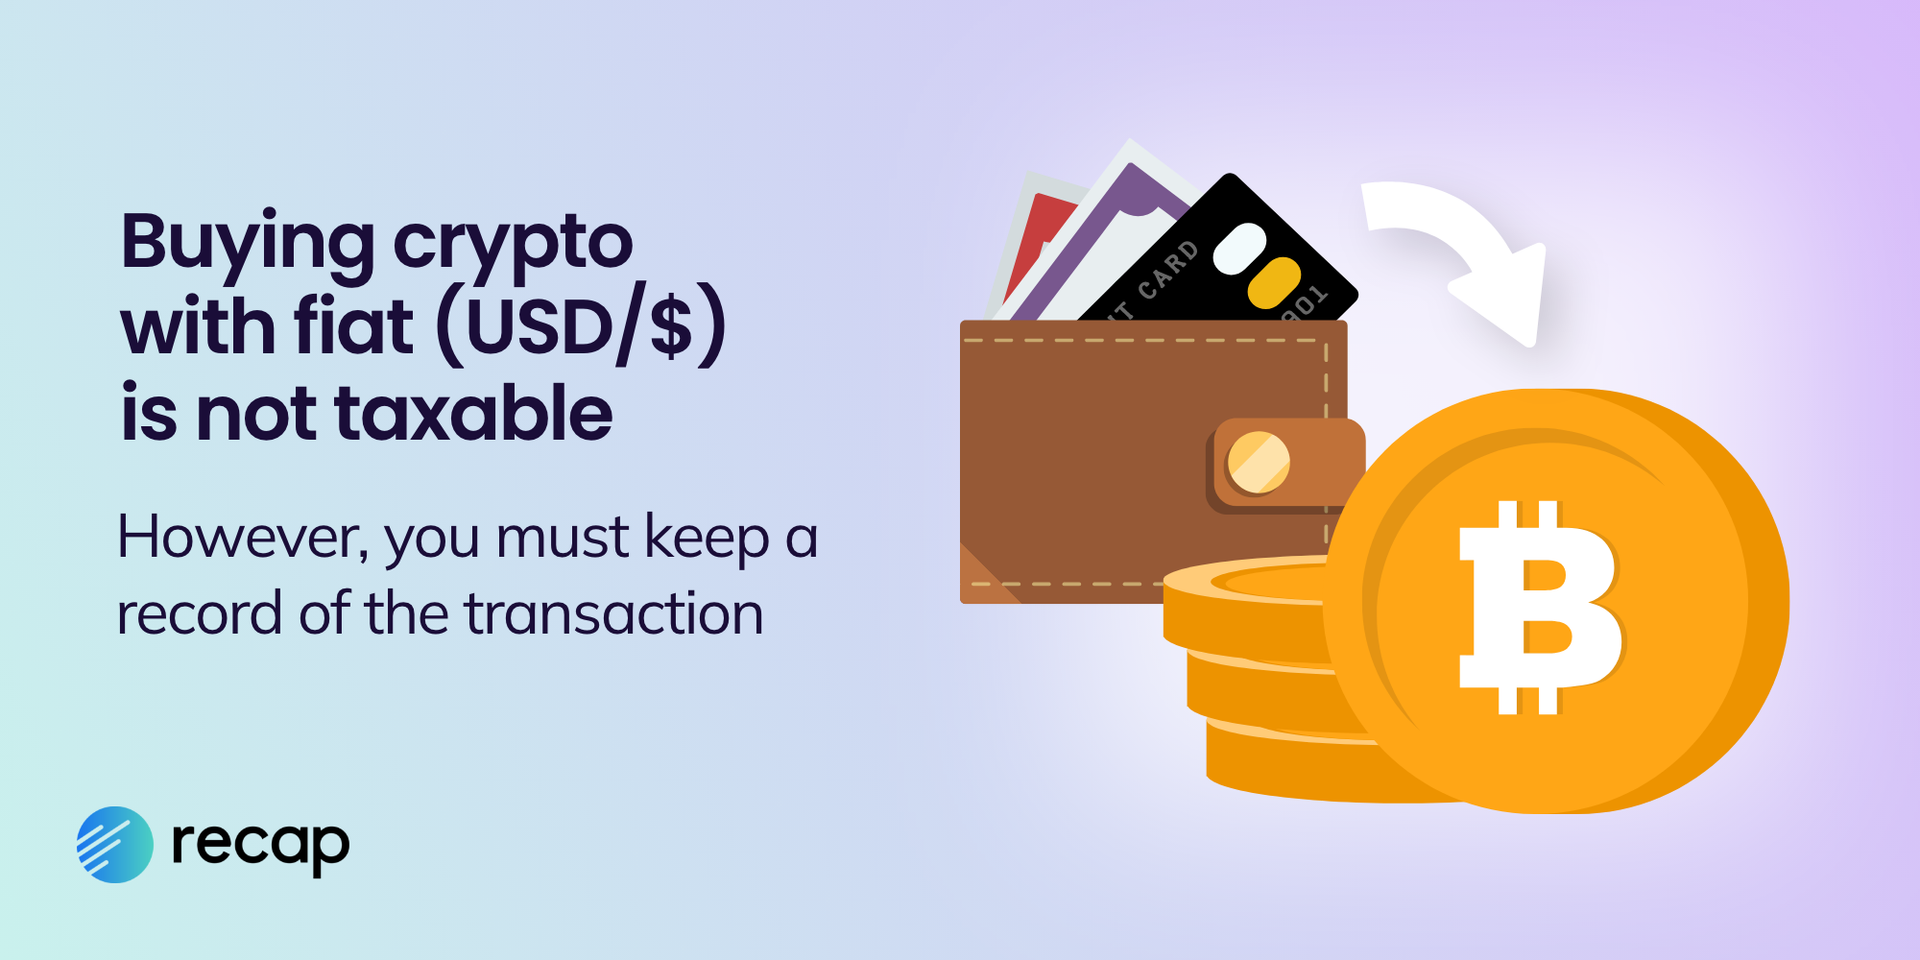 Illustration stating that buying crypto with USD is not taxable however you should keep a record of the transaction